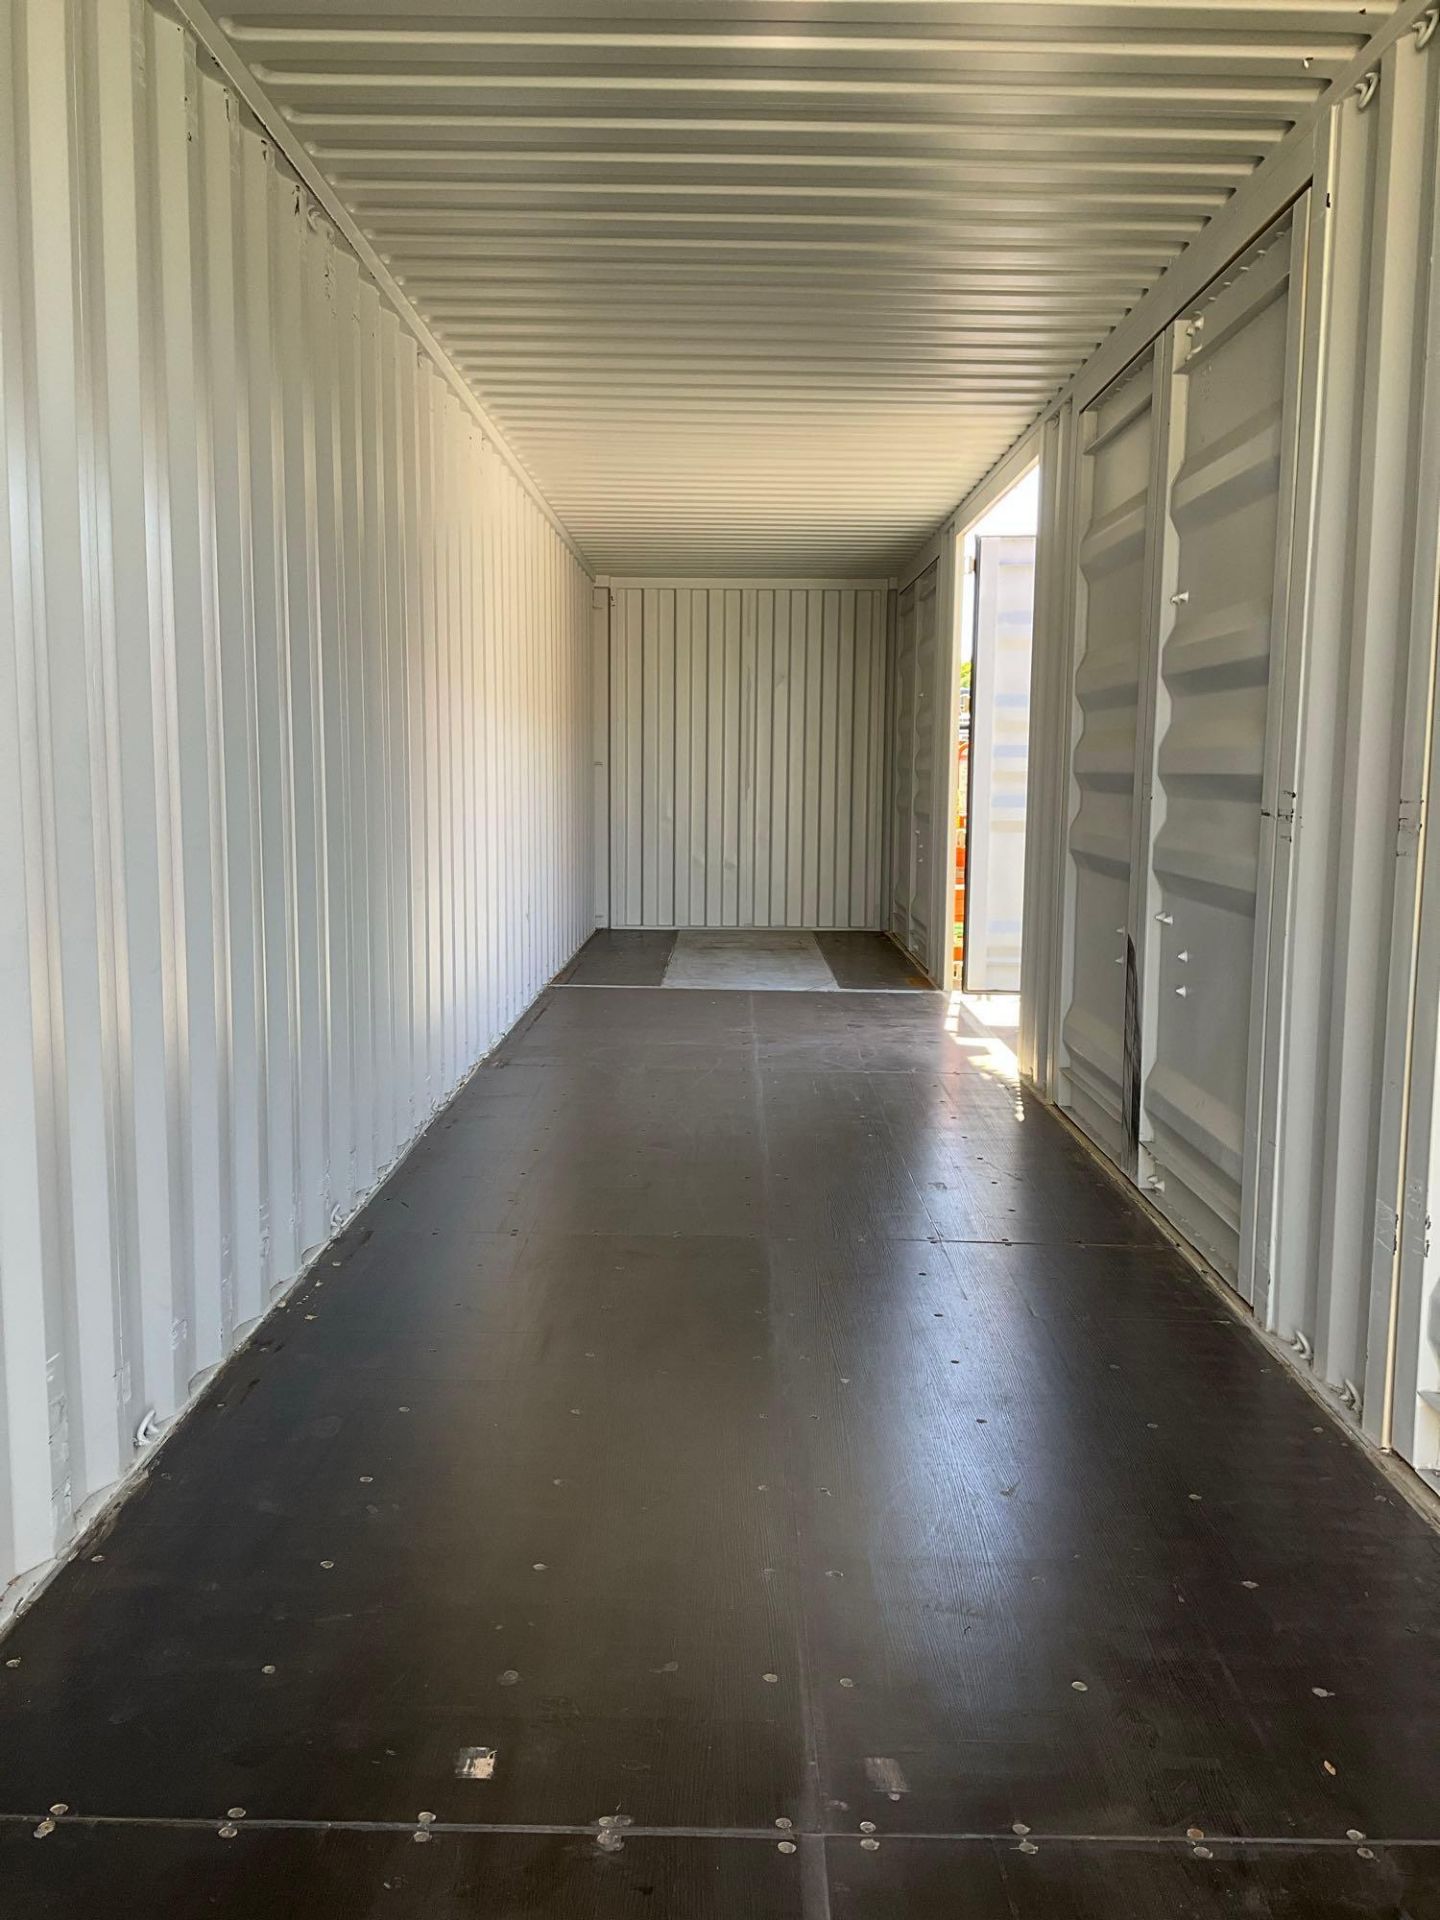 2023 40' STORAGE CONTAINER, APPROX 102" TALL x 96" WIDE x 40' DEEP - Image 8 of 9